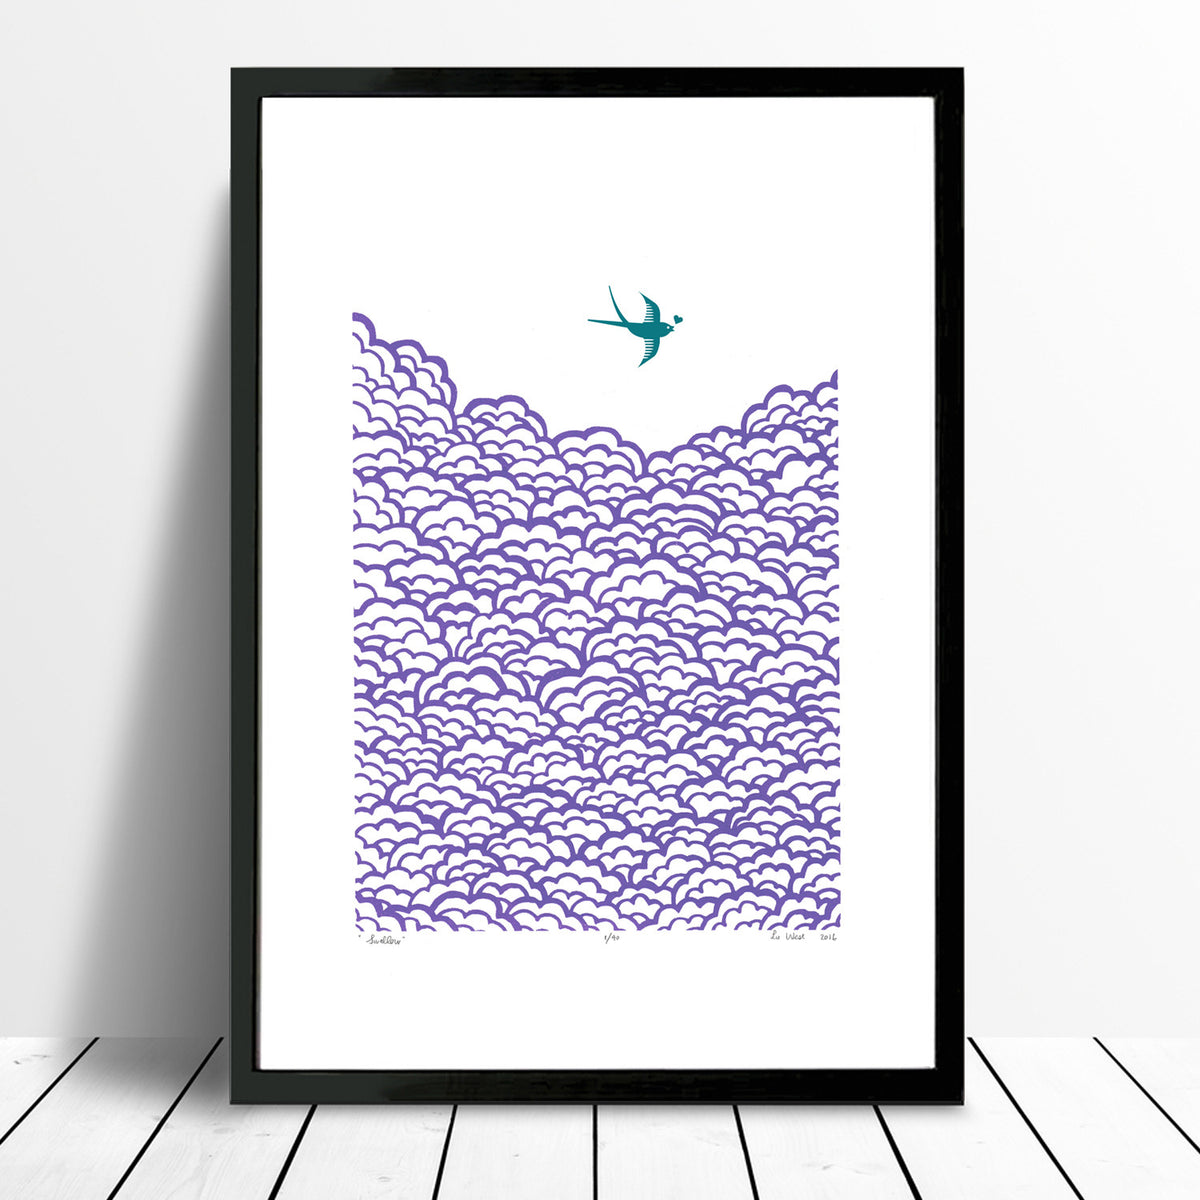 Graphic Scandinavian Style fine art print of a little bird flying high above the clouds. The jewel tones of amethyst will bring Nordic charm to your interiors.